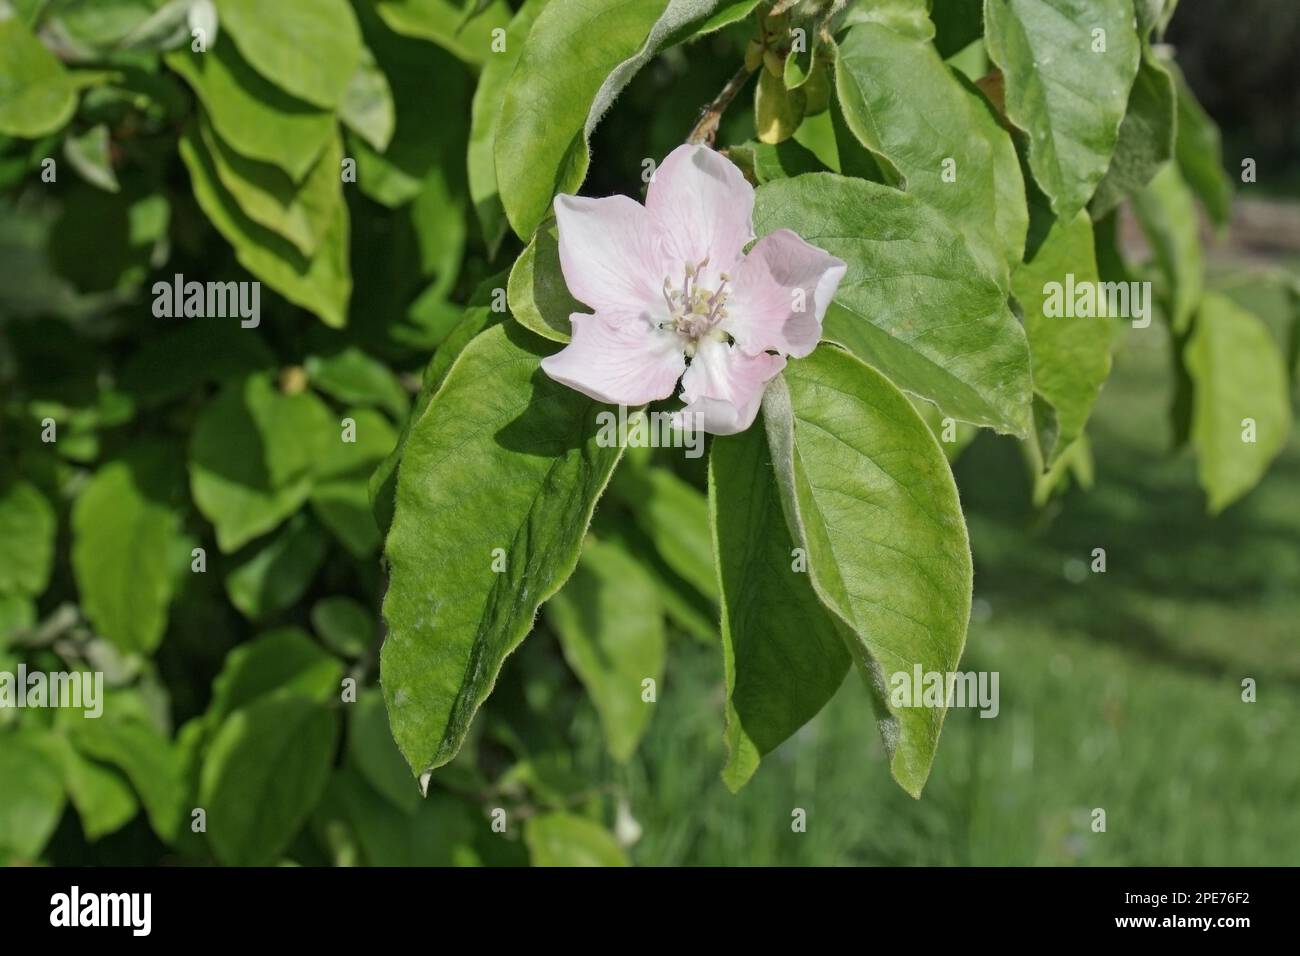 Quince (Cydonia oblonga) close-up of flower and leaves, growing in garden, Mendlesham, Suffolk, England, United Kingdom Stock Photo